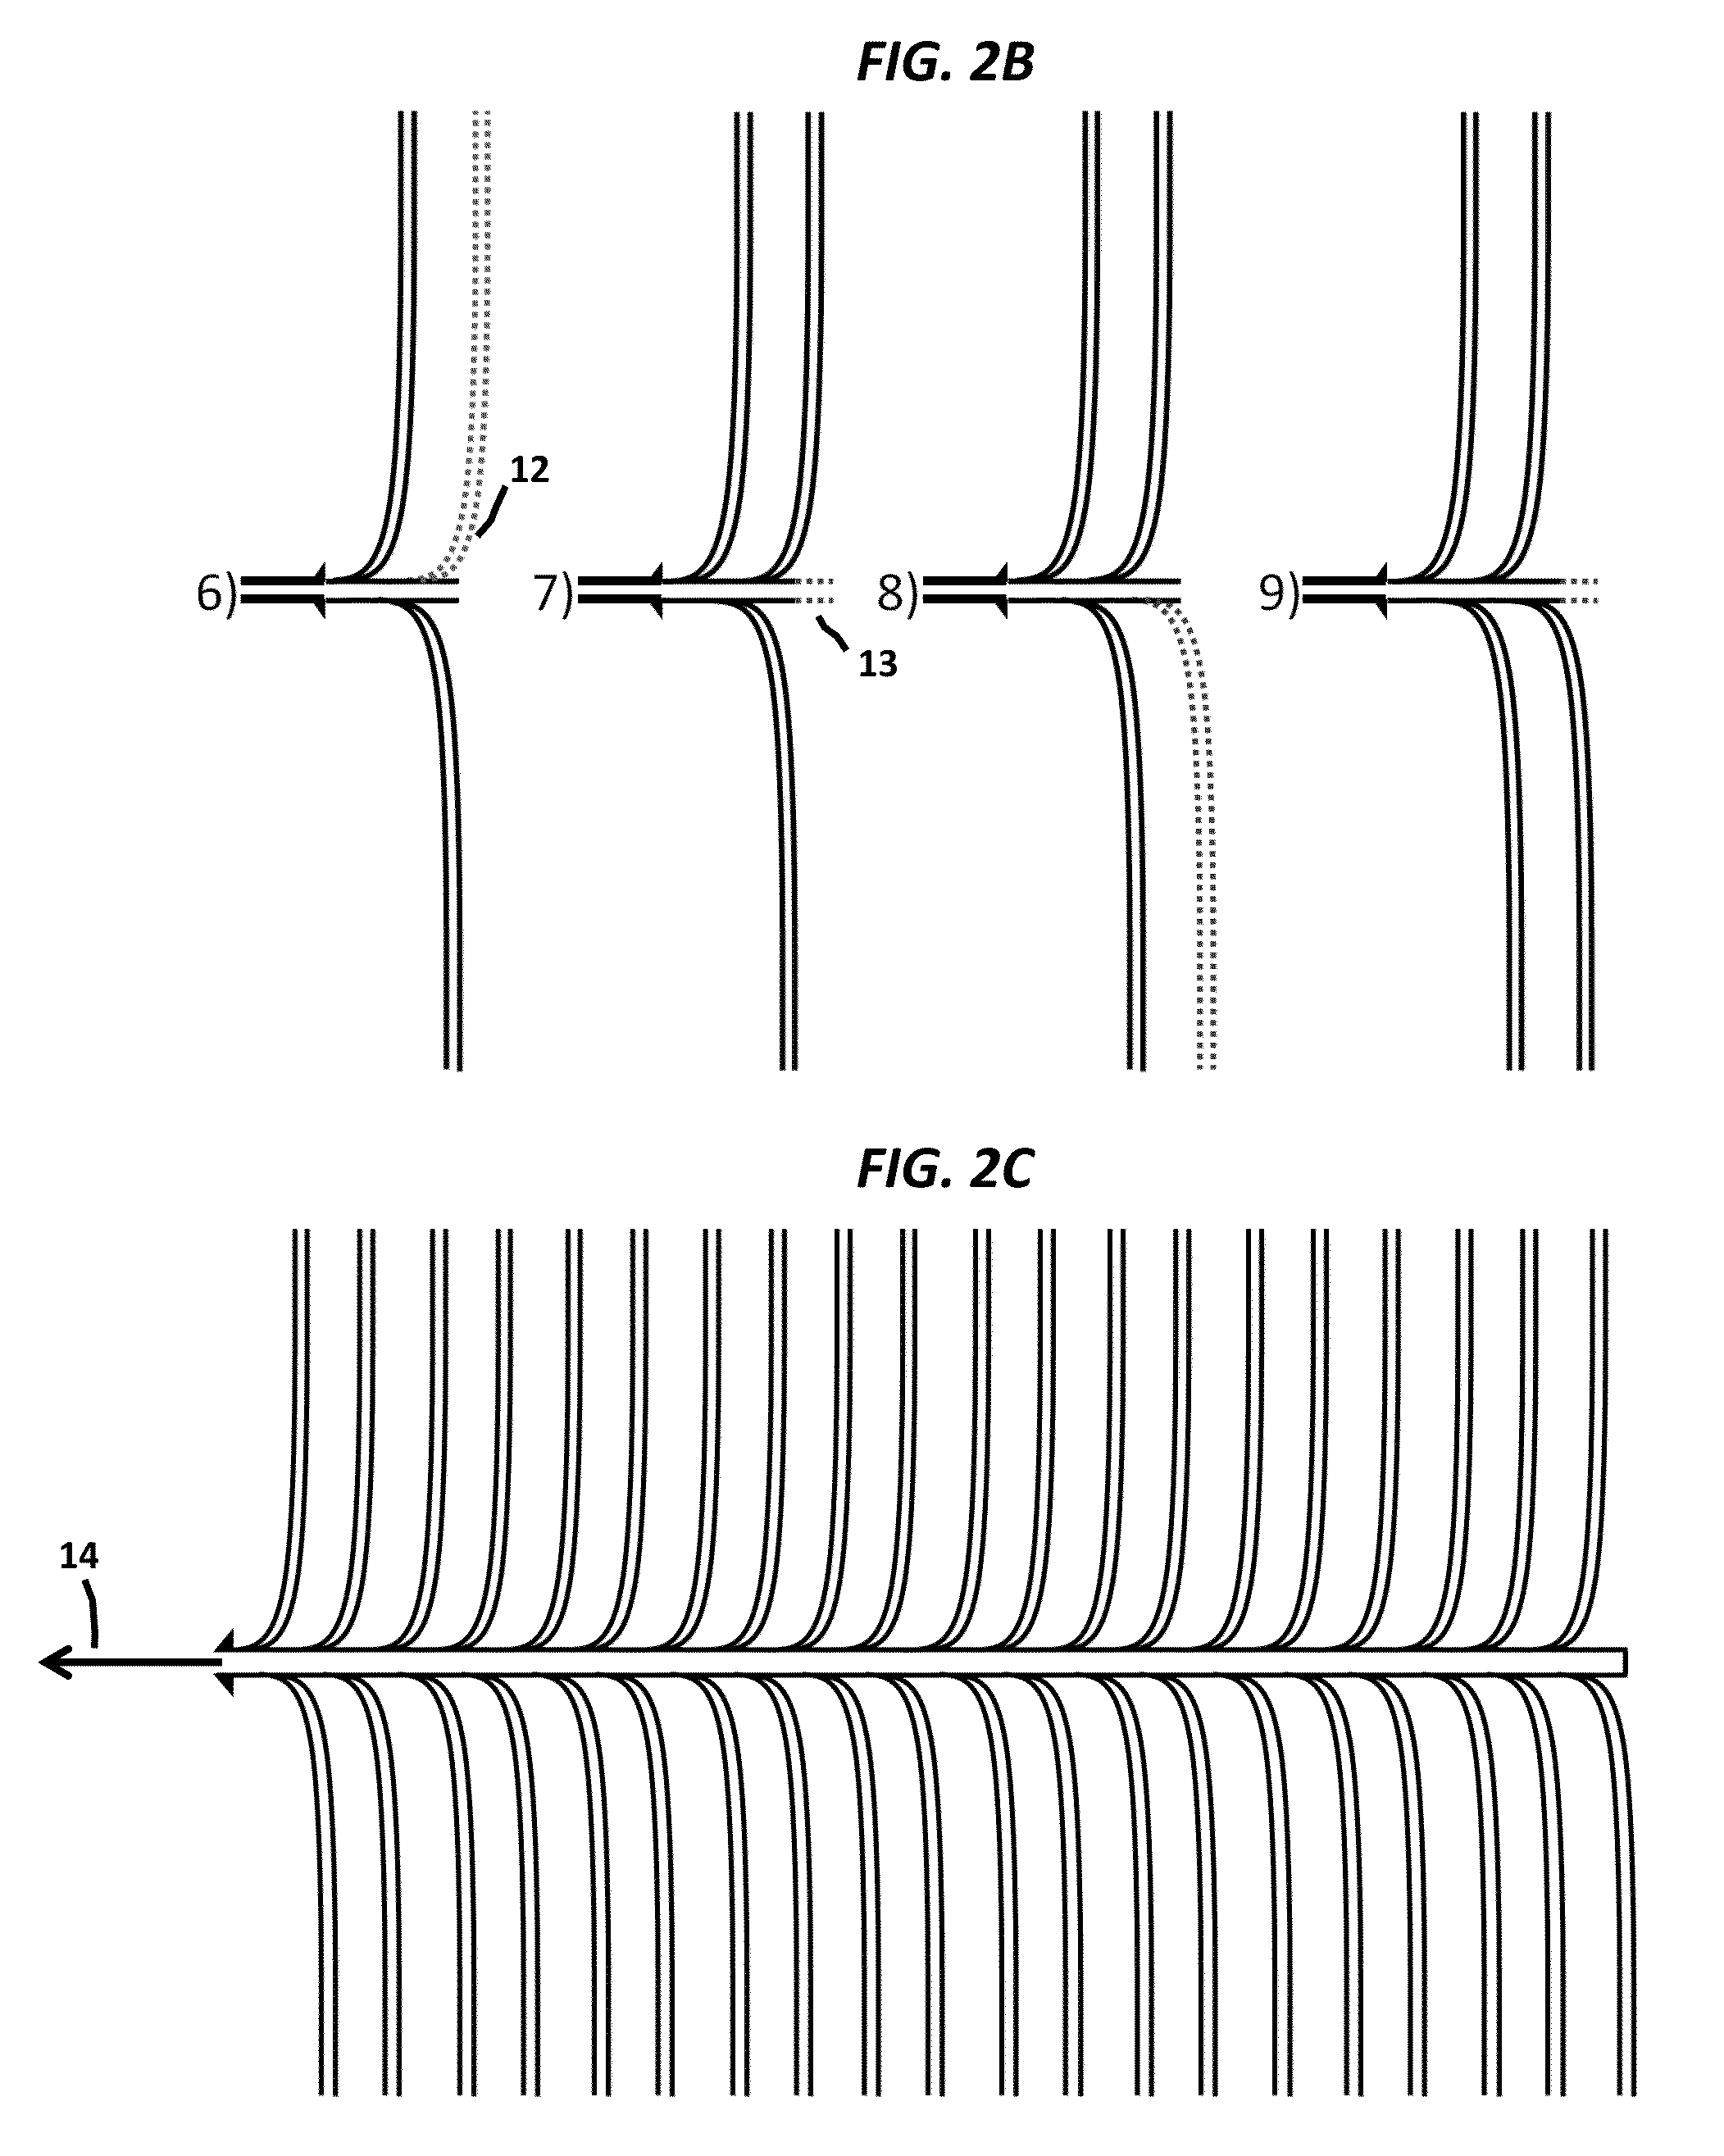 Method for developing oil or natural gas shale or tight rock formations in two step process